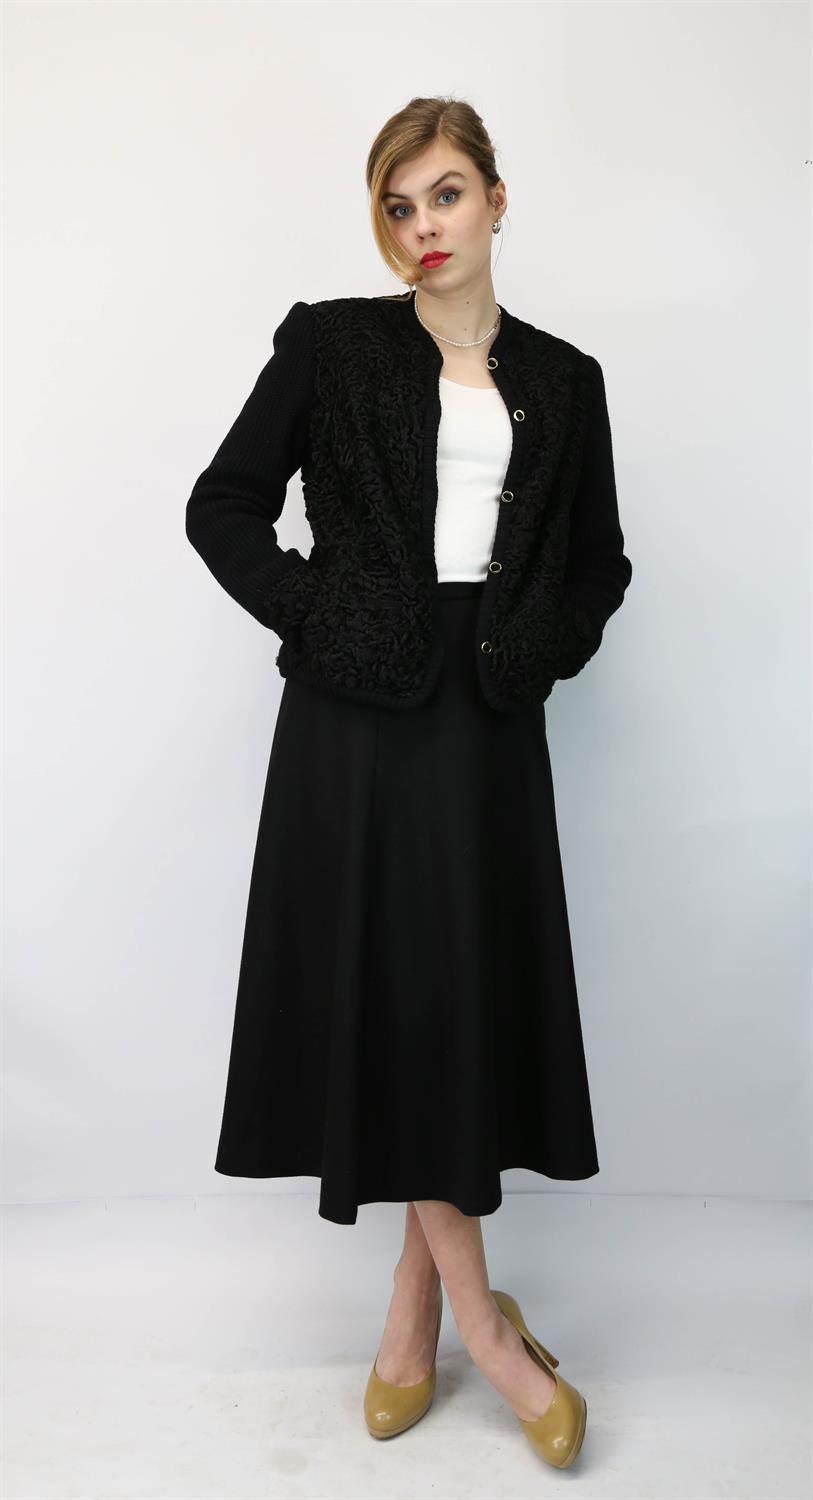 Quality "PERING" French couture designer ladies black lined probably cashmere heavy skirt suit with - Image 5 of 6